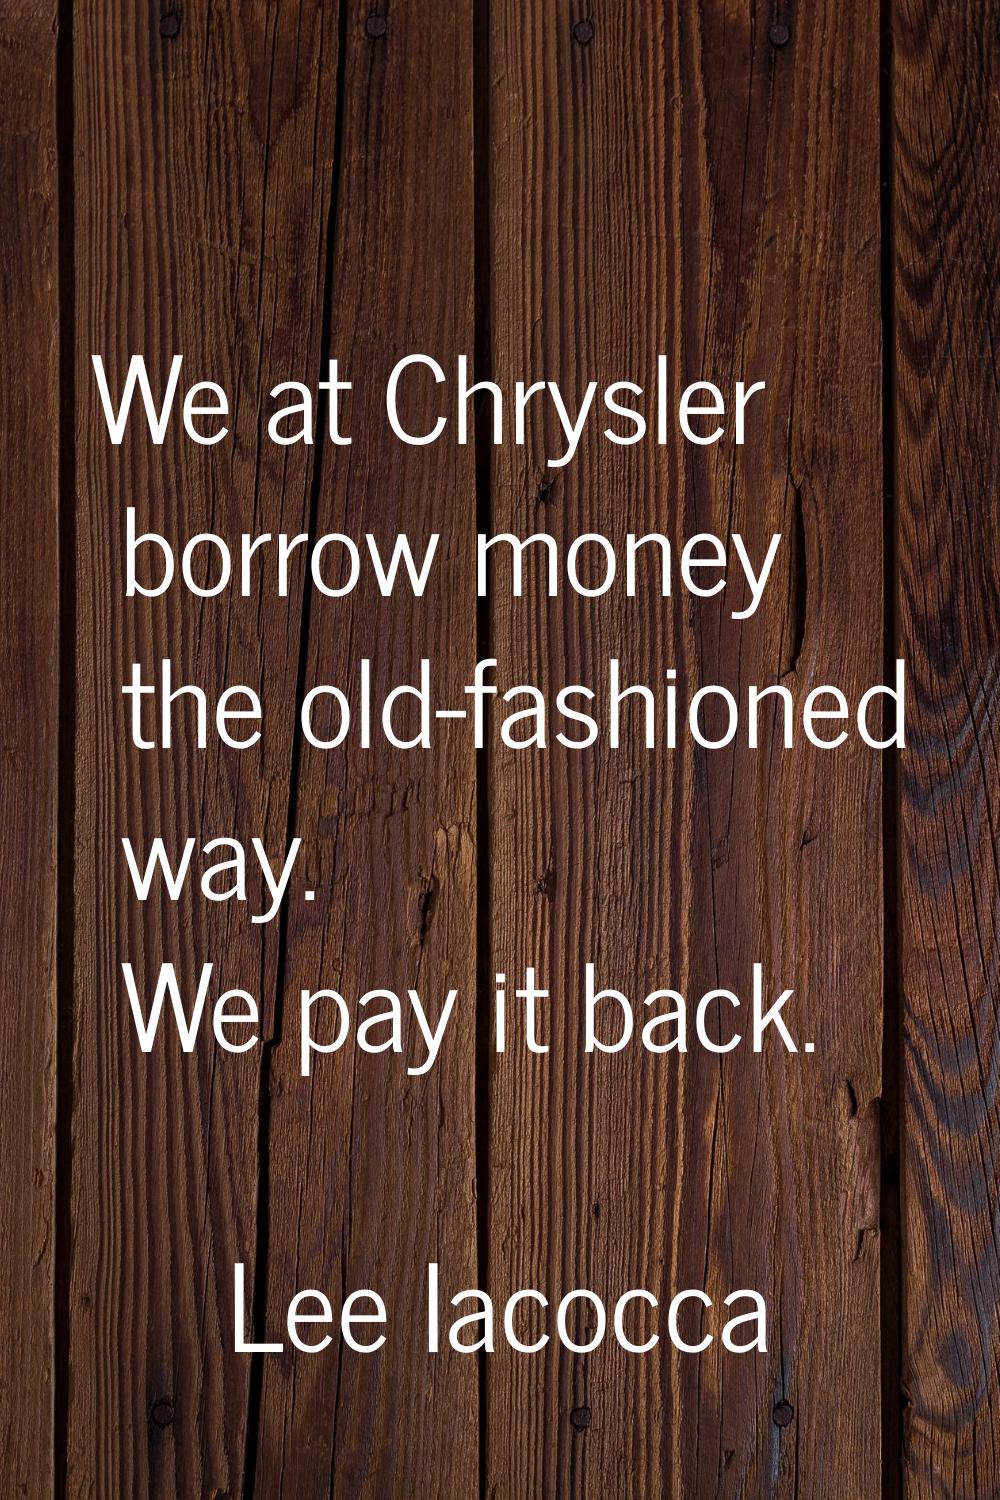 We at Chrysler borrow money the old-fashioned way. We pay it back.